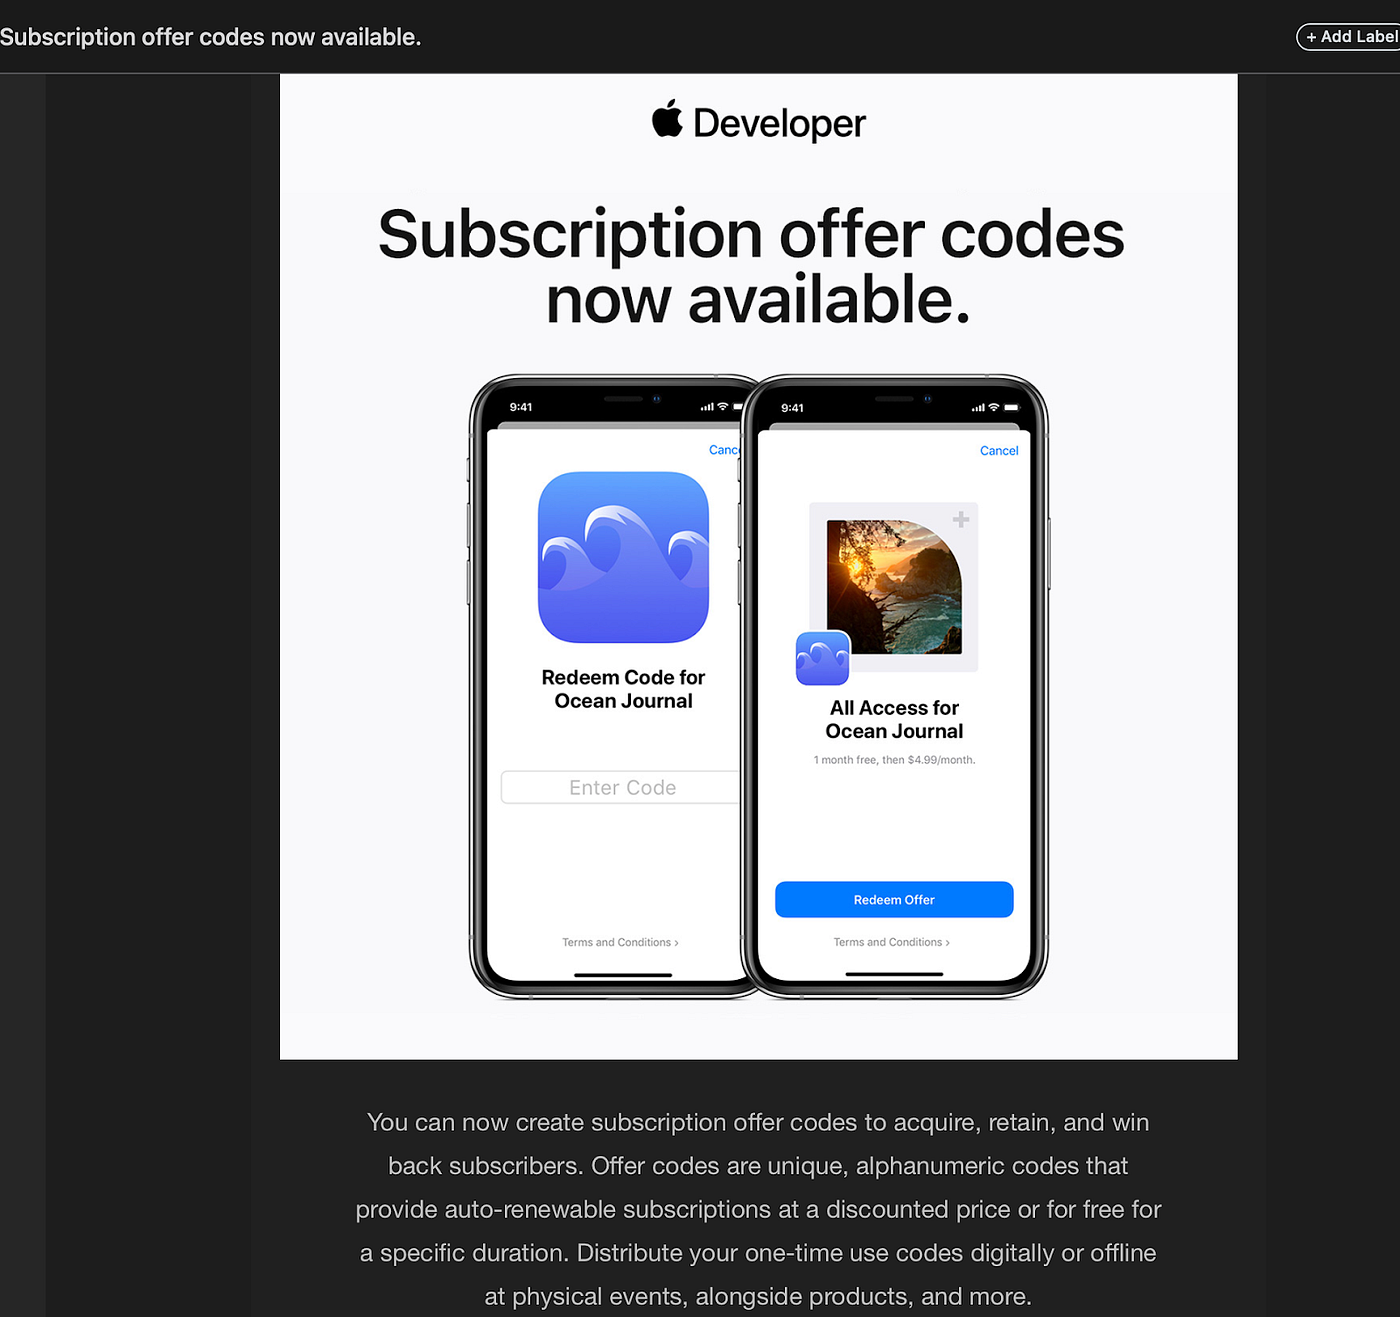 Request and manage promo codes - Offer promo codes - App Store